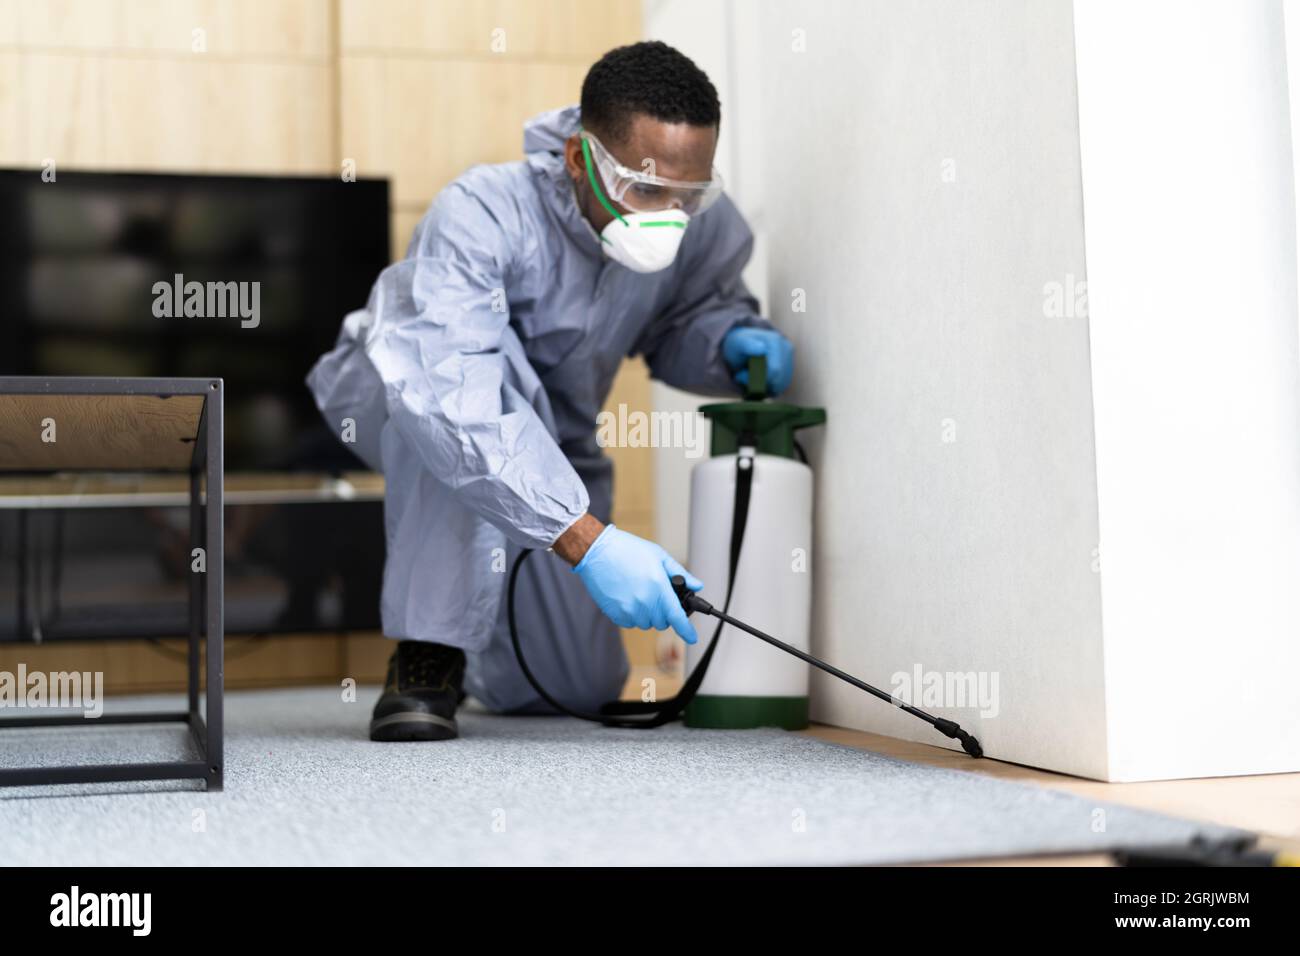 Pest Control Exterminator Services Spraying Termite Insecticide Stock Photo